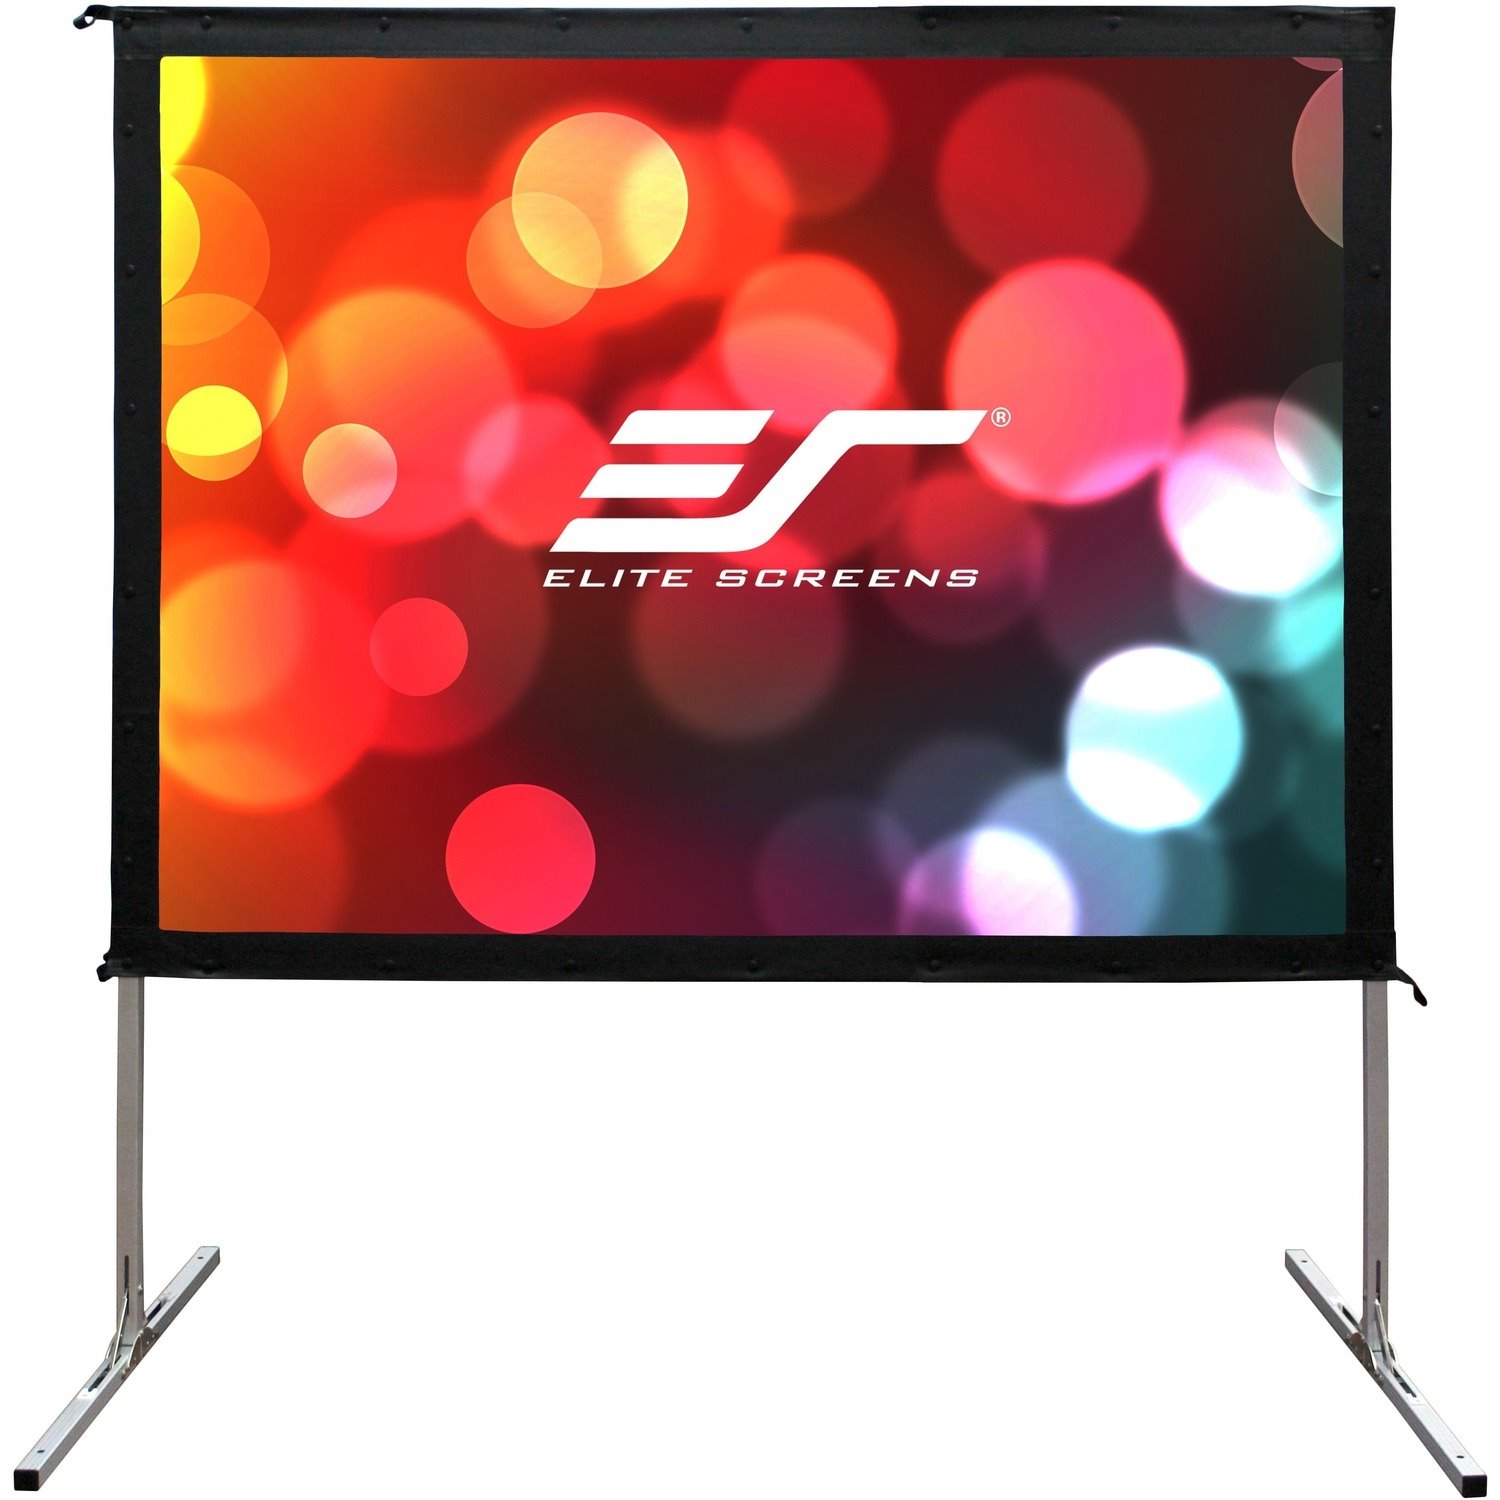 Elite Screens Yard Master 2 Z-OMS135VR2 135" Replacement Surface